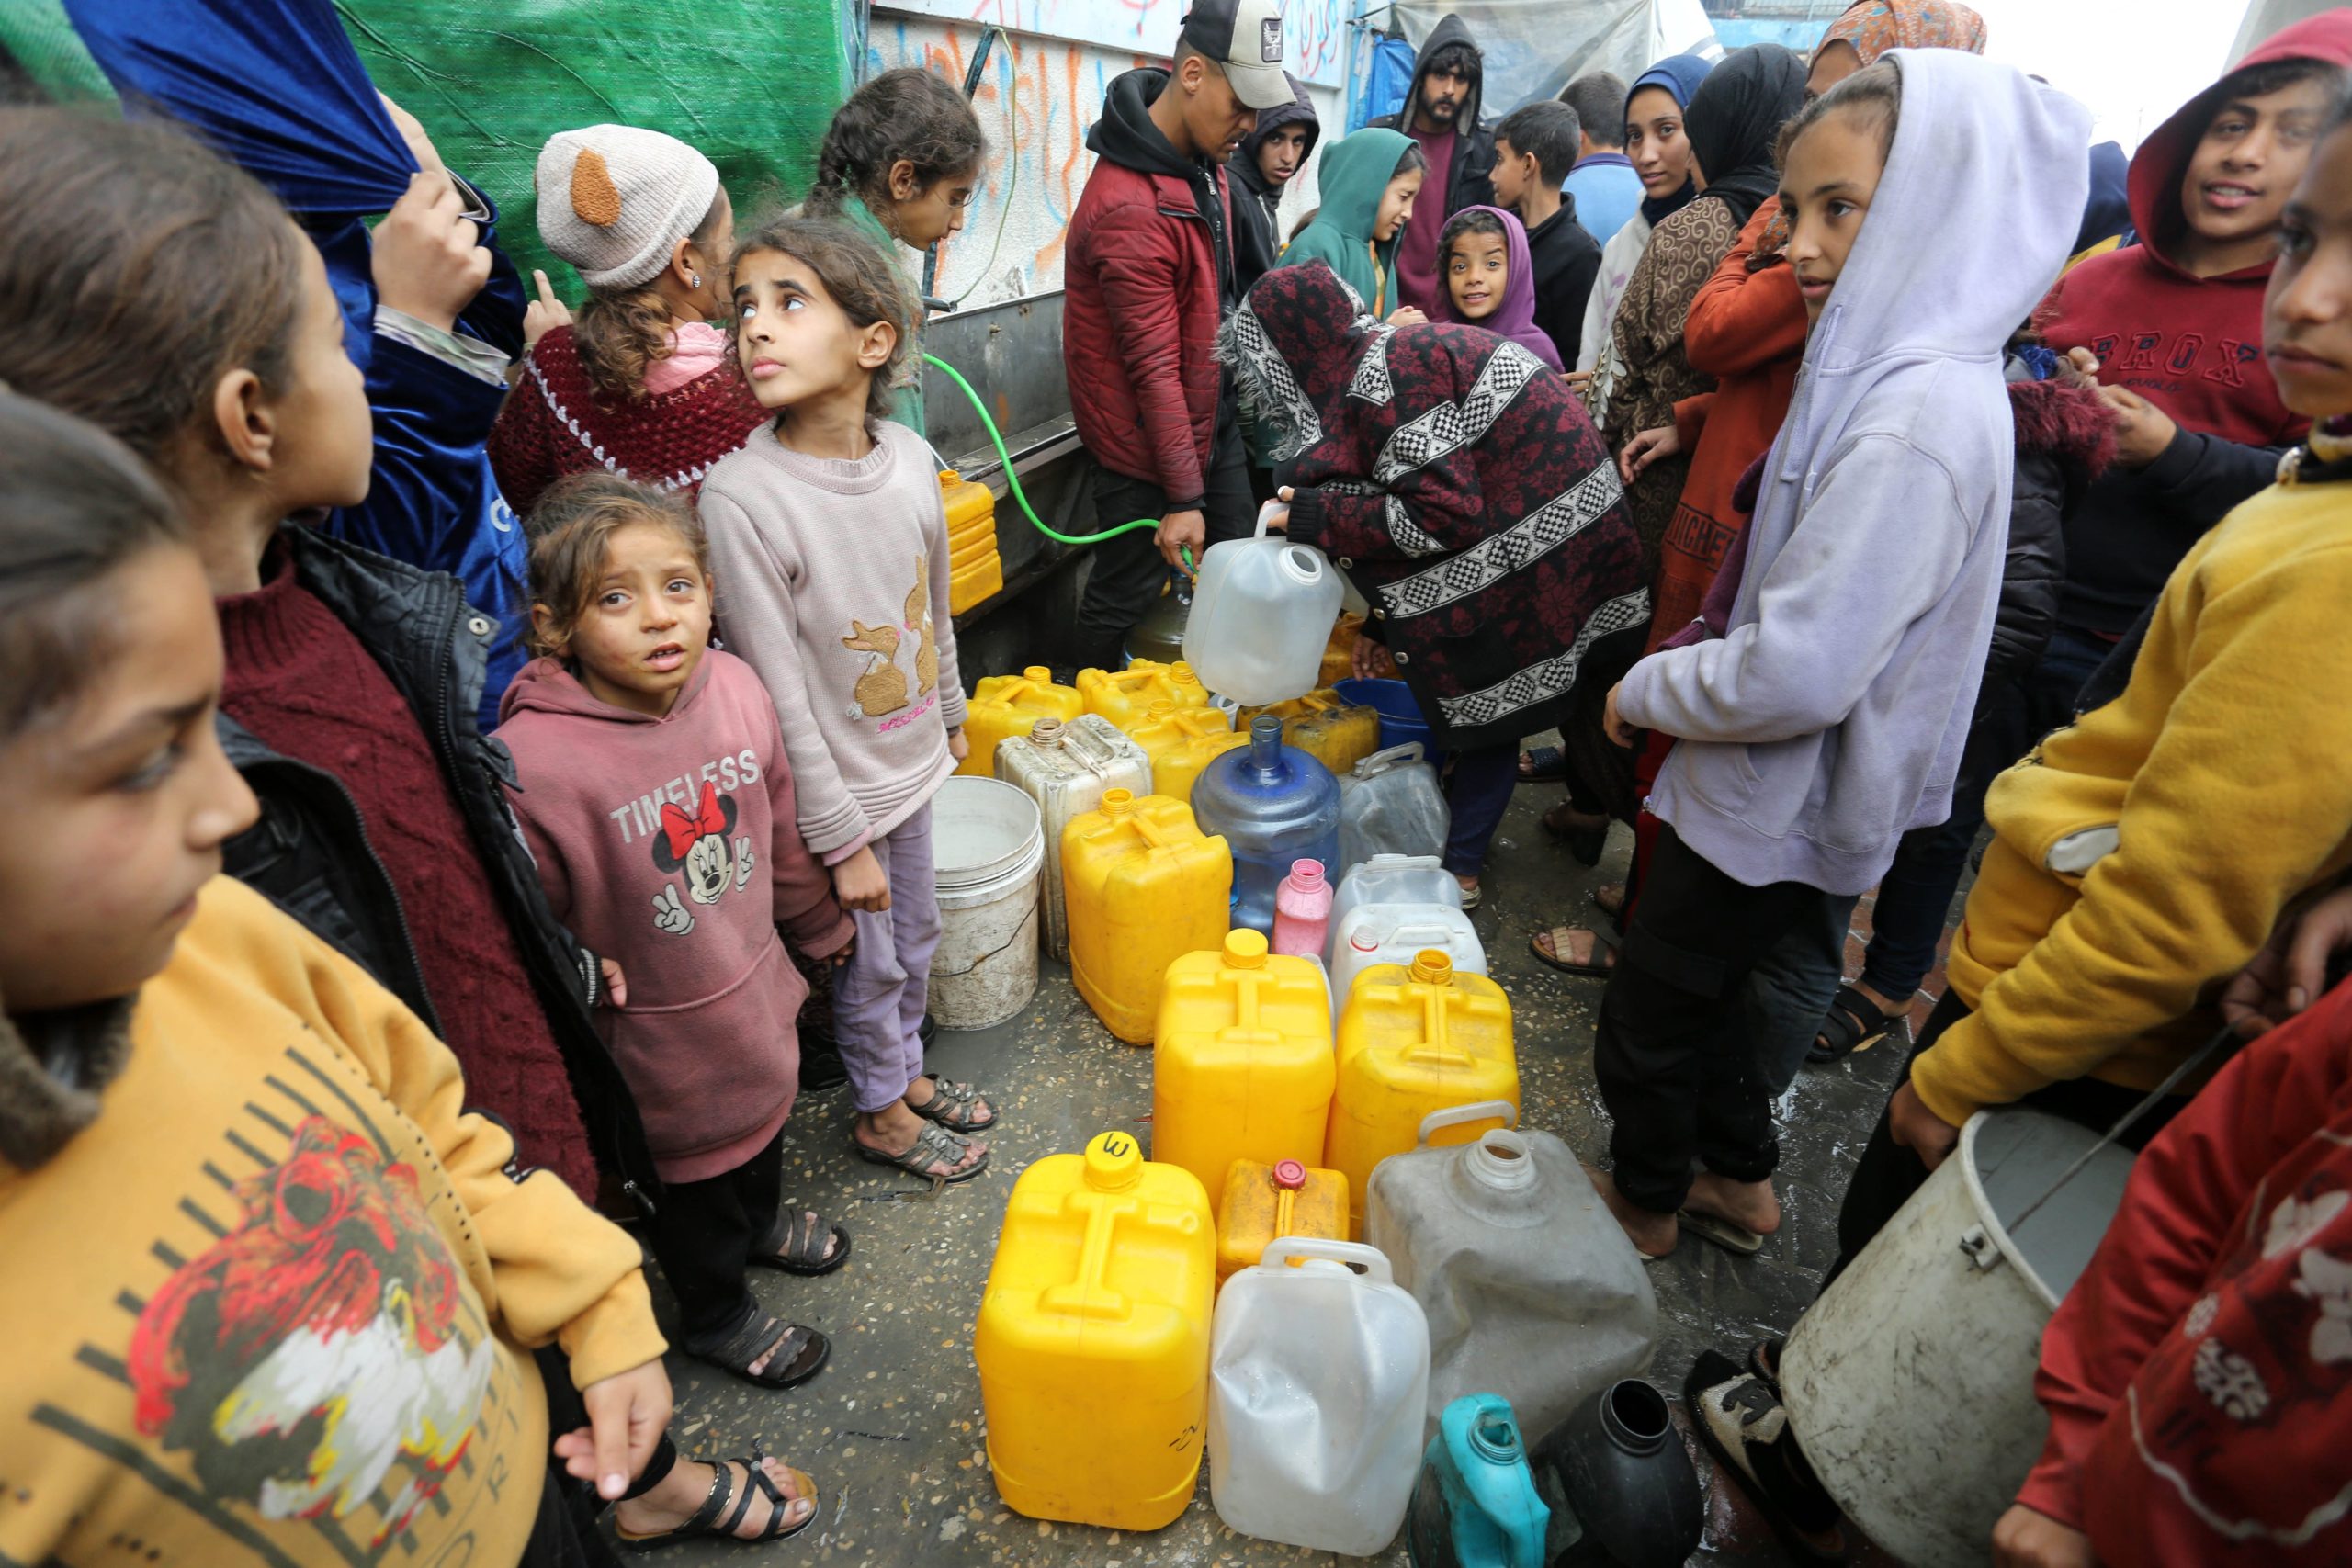 Gaza municipality issues “urgent appeal” amid acute water shortage